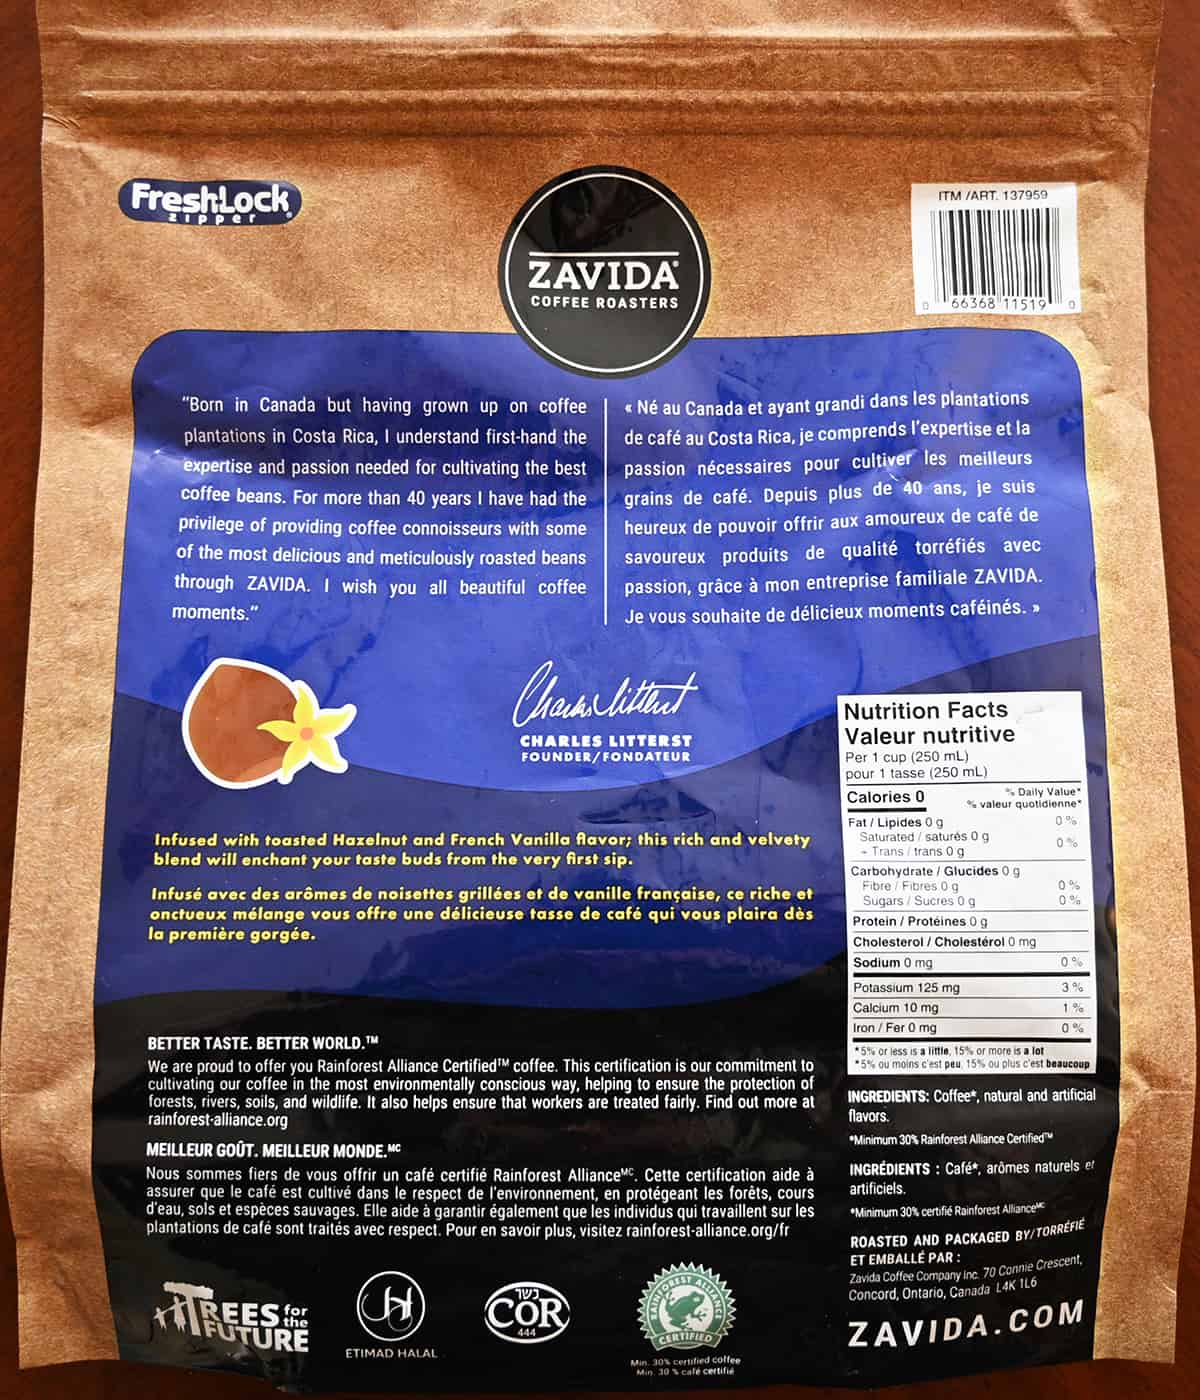 Image of the back of the bag of coffee beans showing the product description.